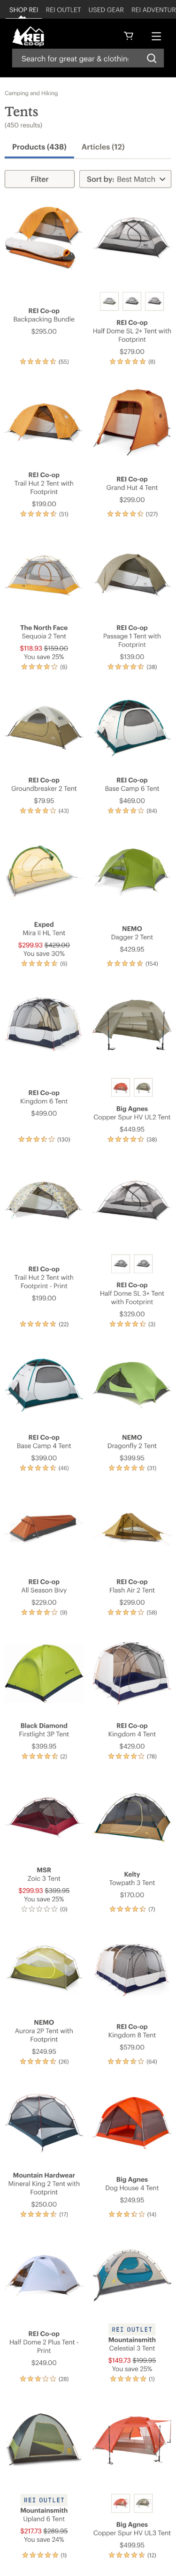 rei mobile category page